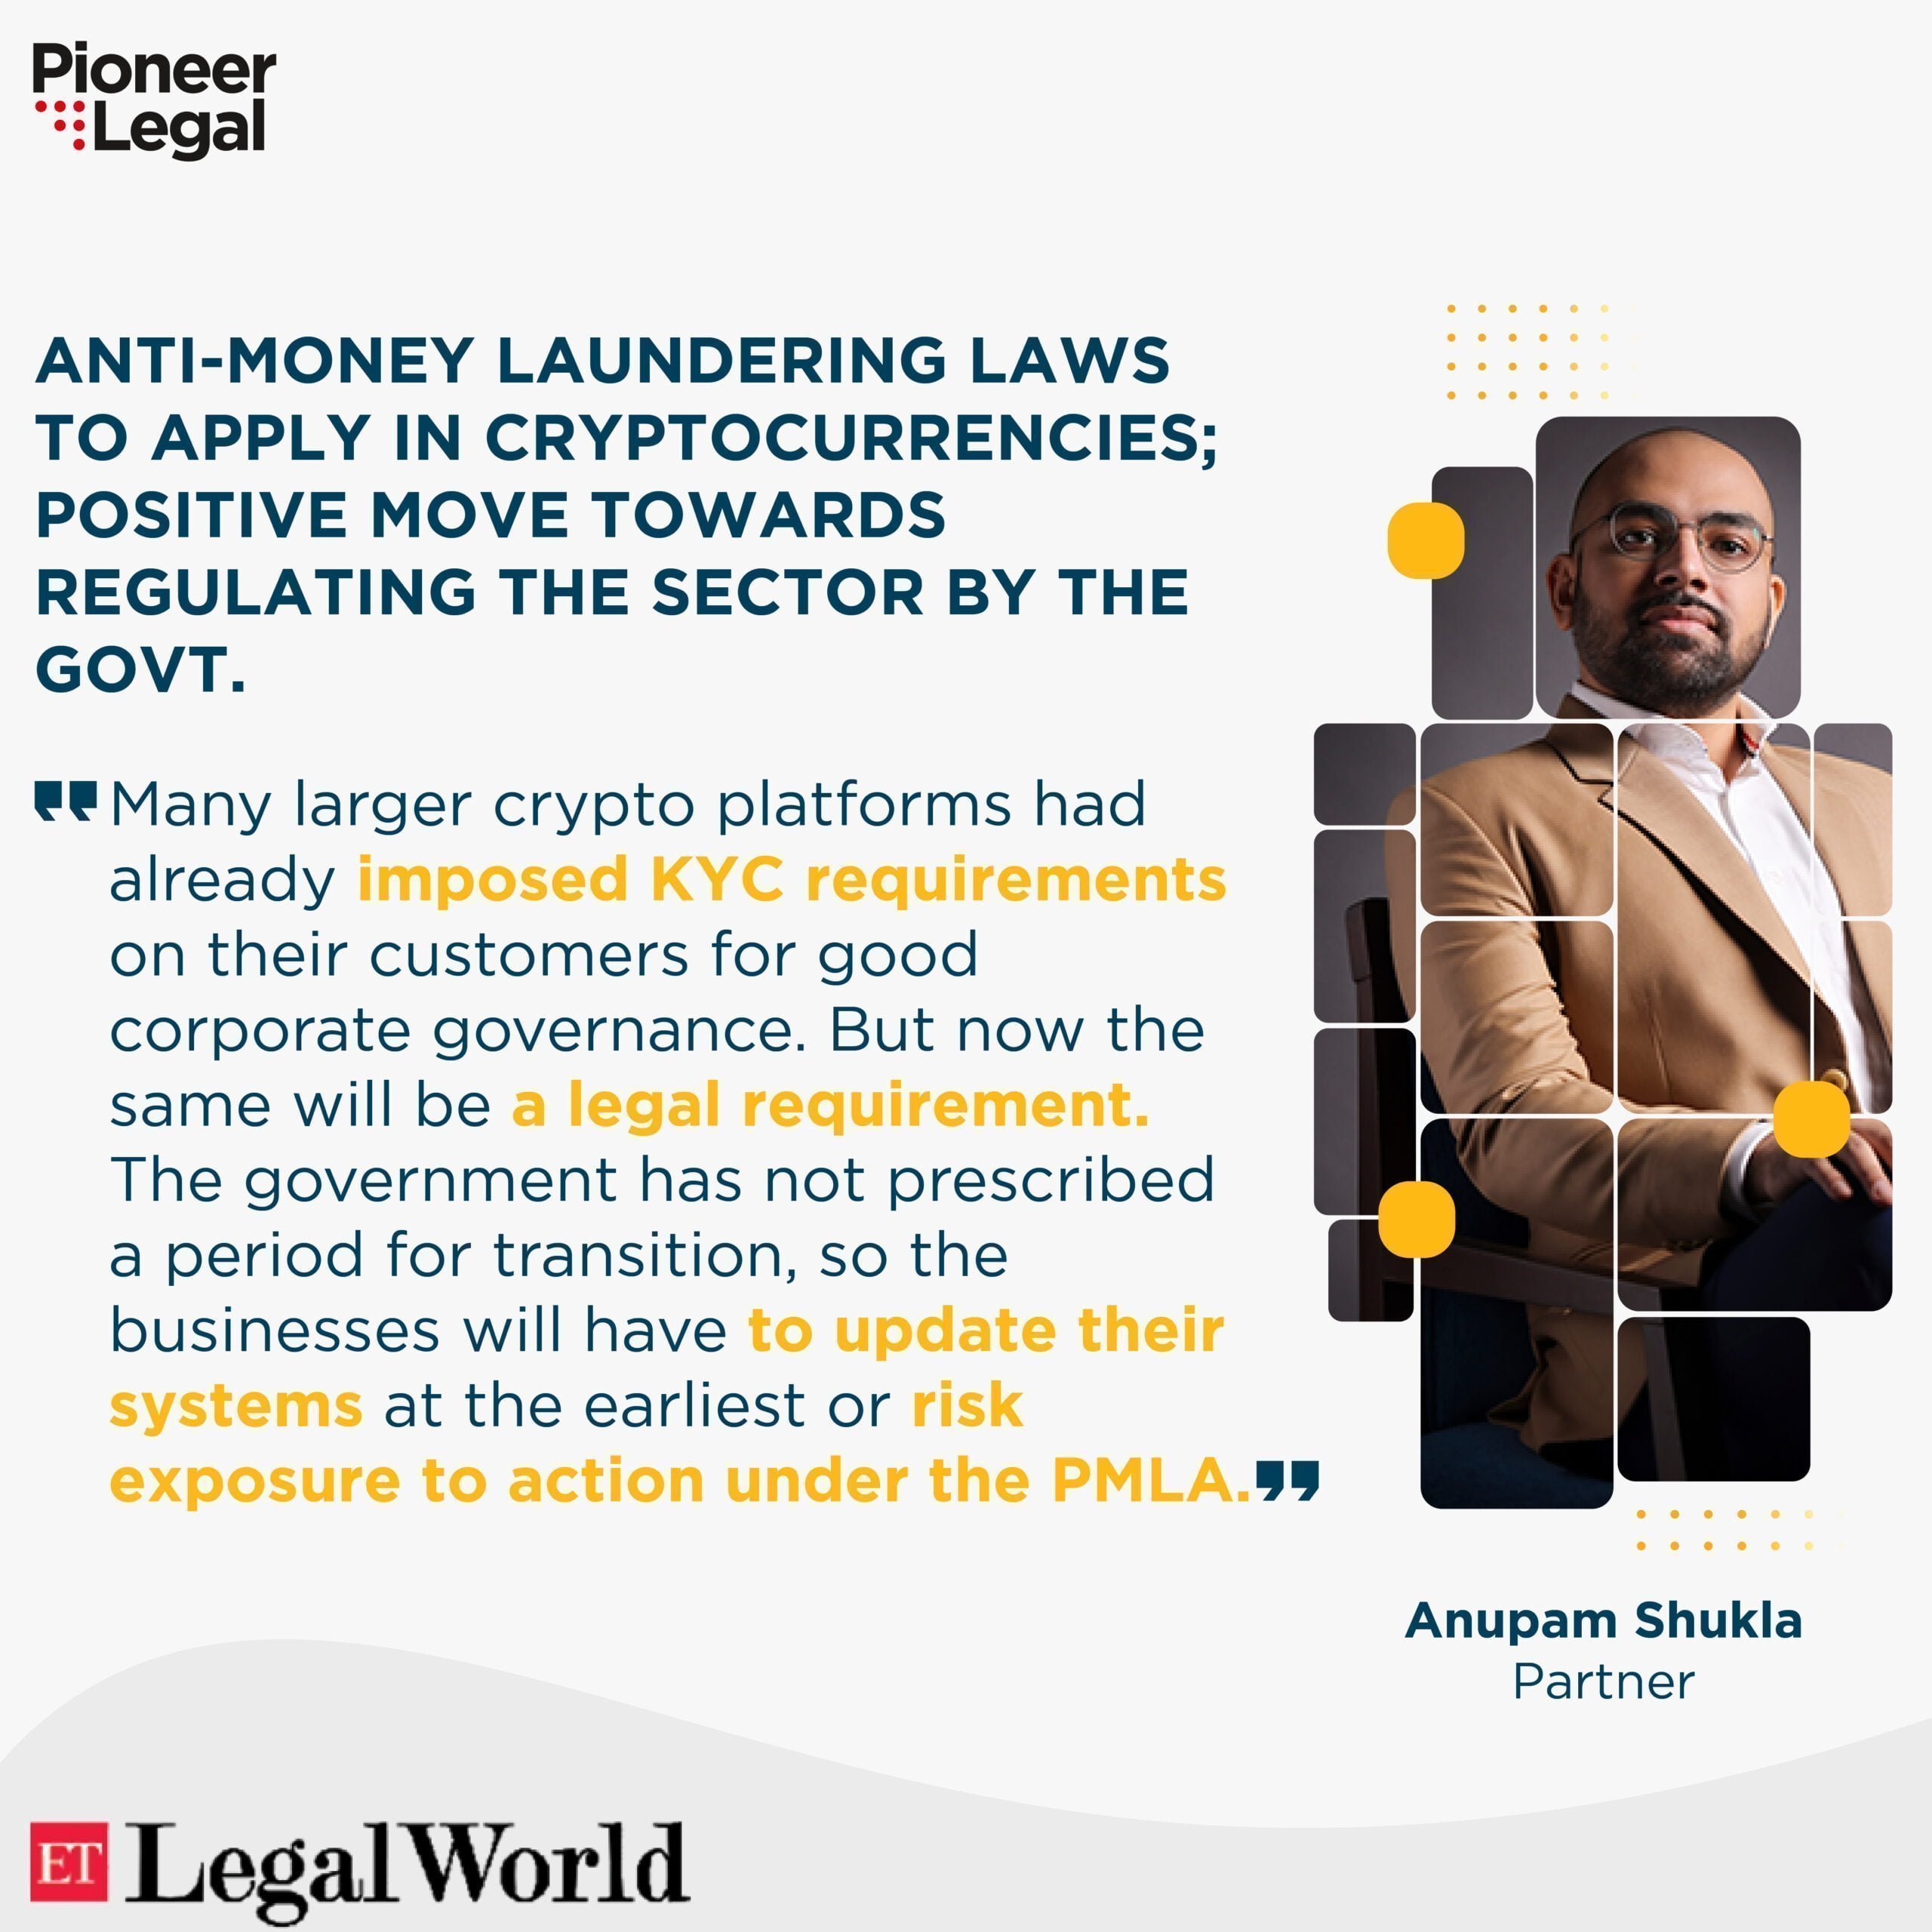 Pioneer Legal - Anti-money laundering laws to apply in Cryptocurrencies; positive move towards regulating the Sector by the Govt.